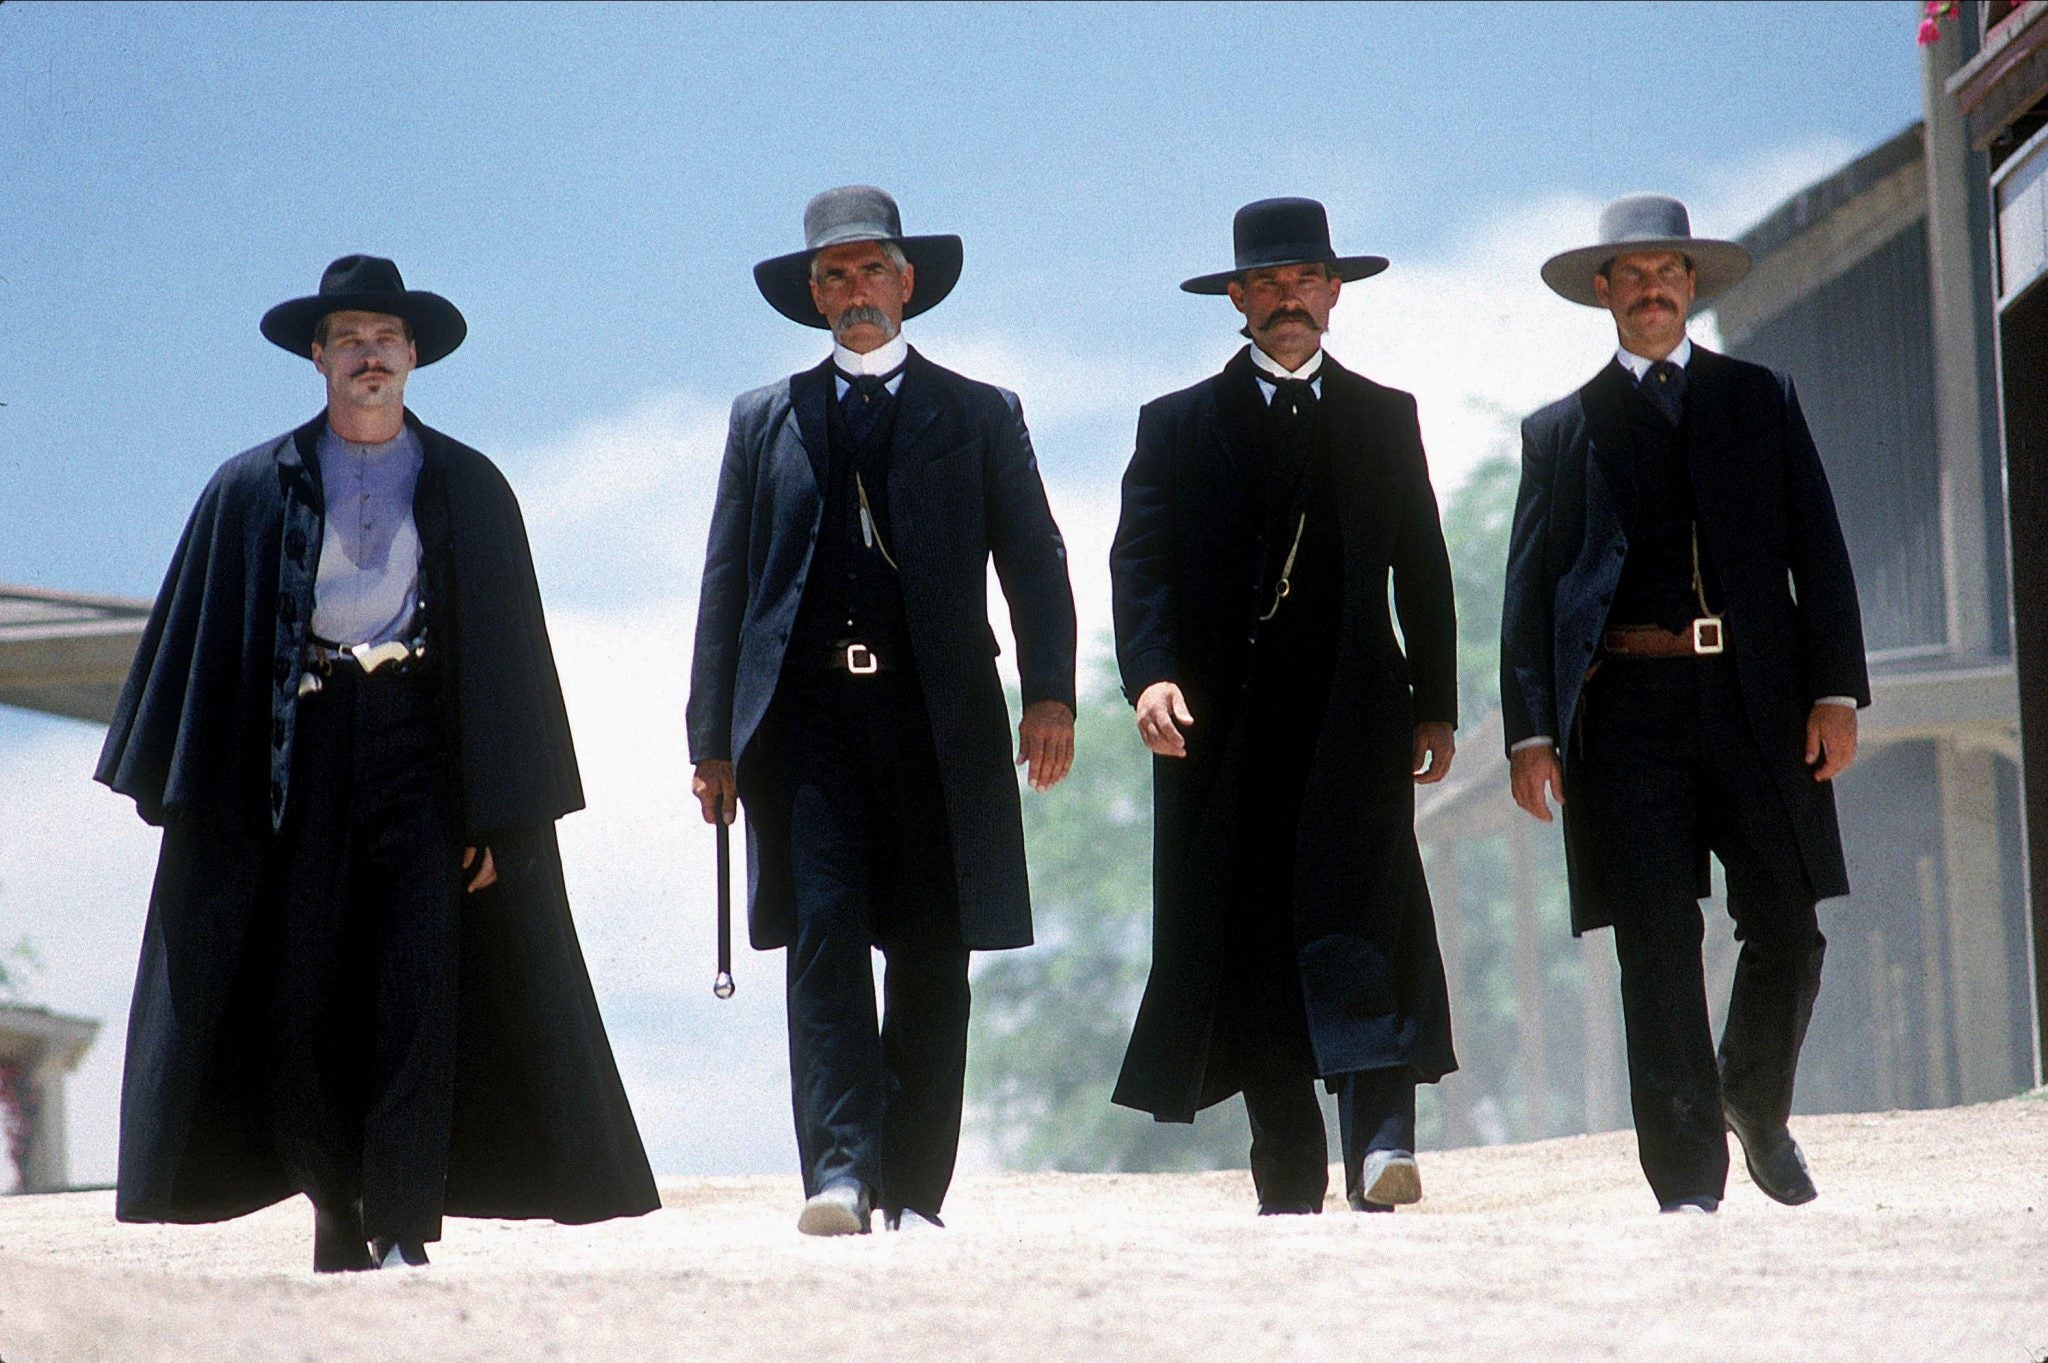 What Did Doc Holliday Mean by "I'll be your huckleberry" in the Movie Tombstone?